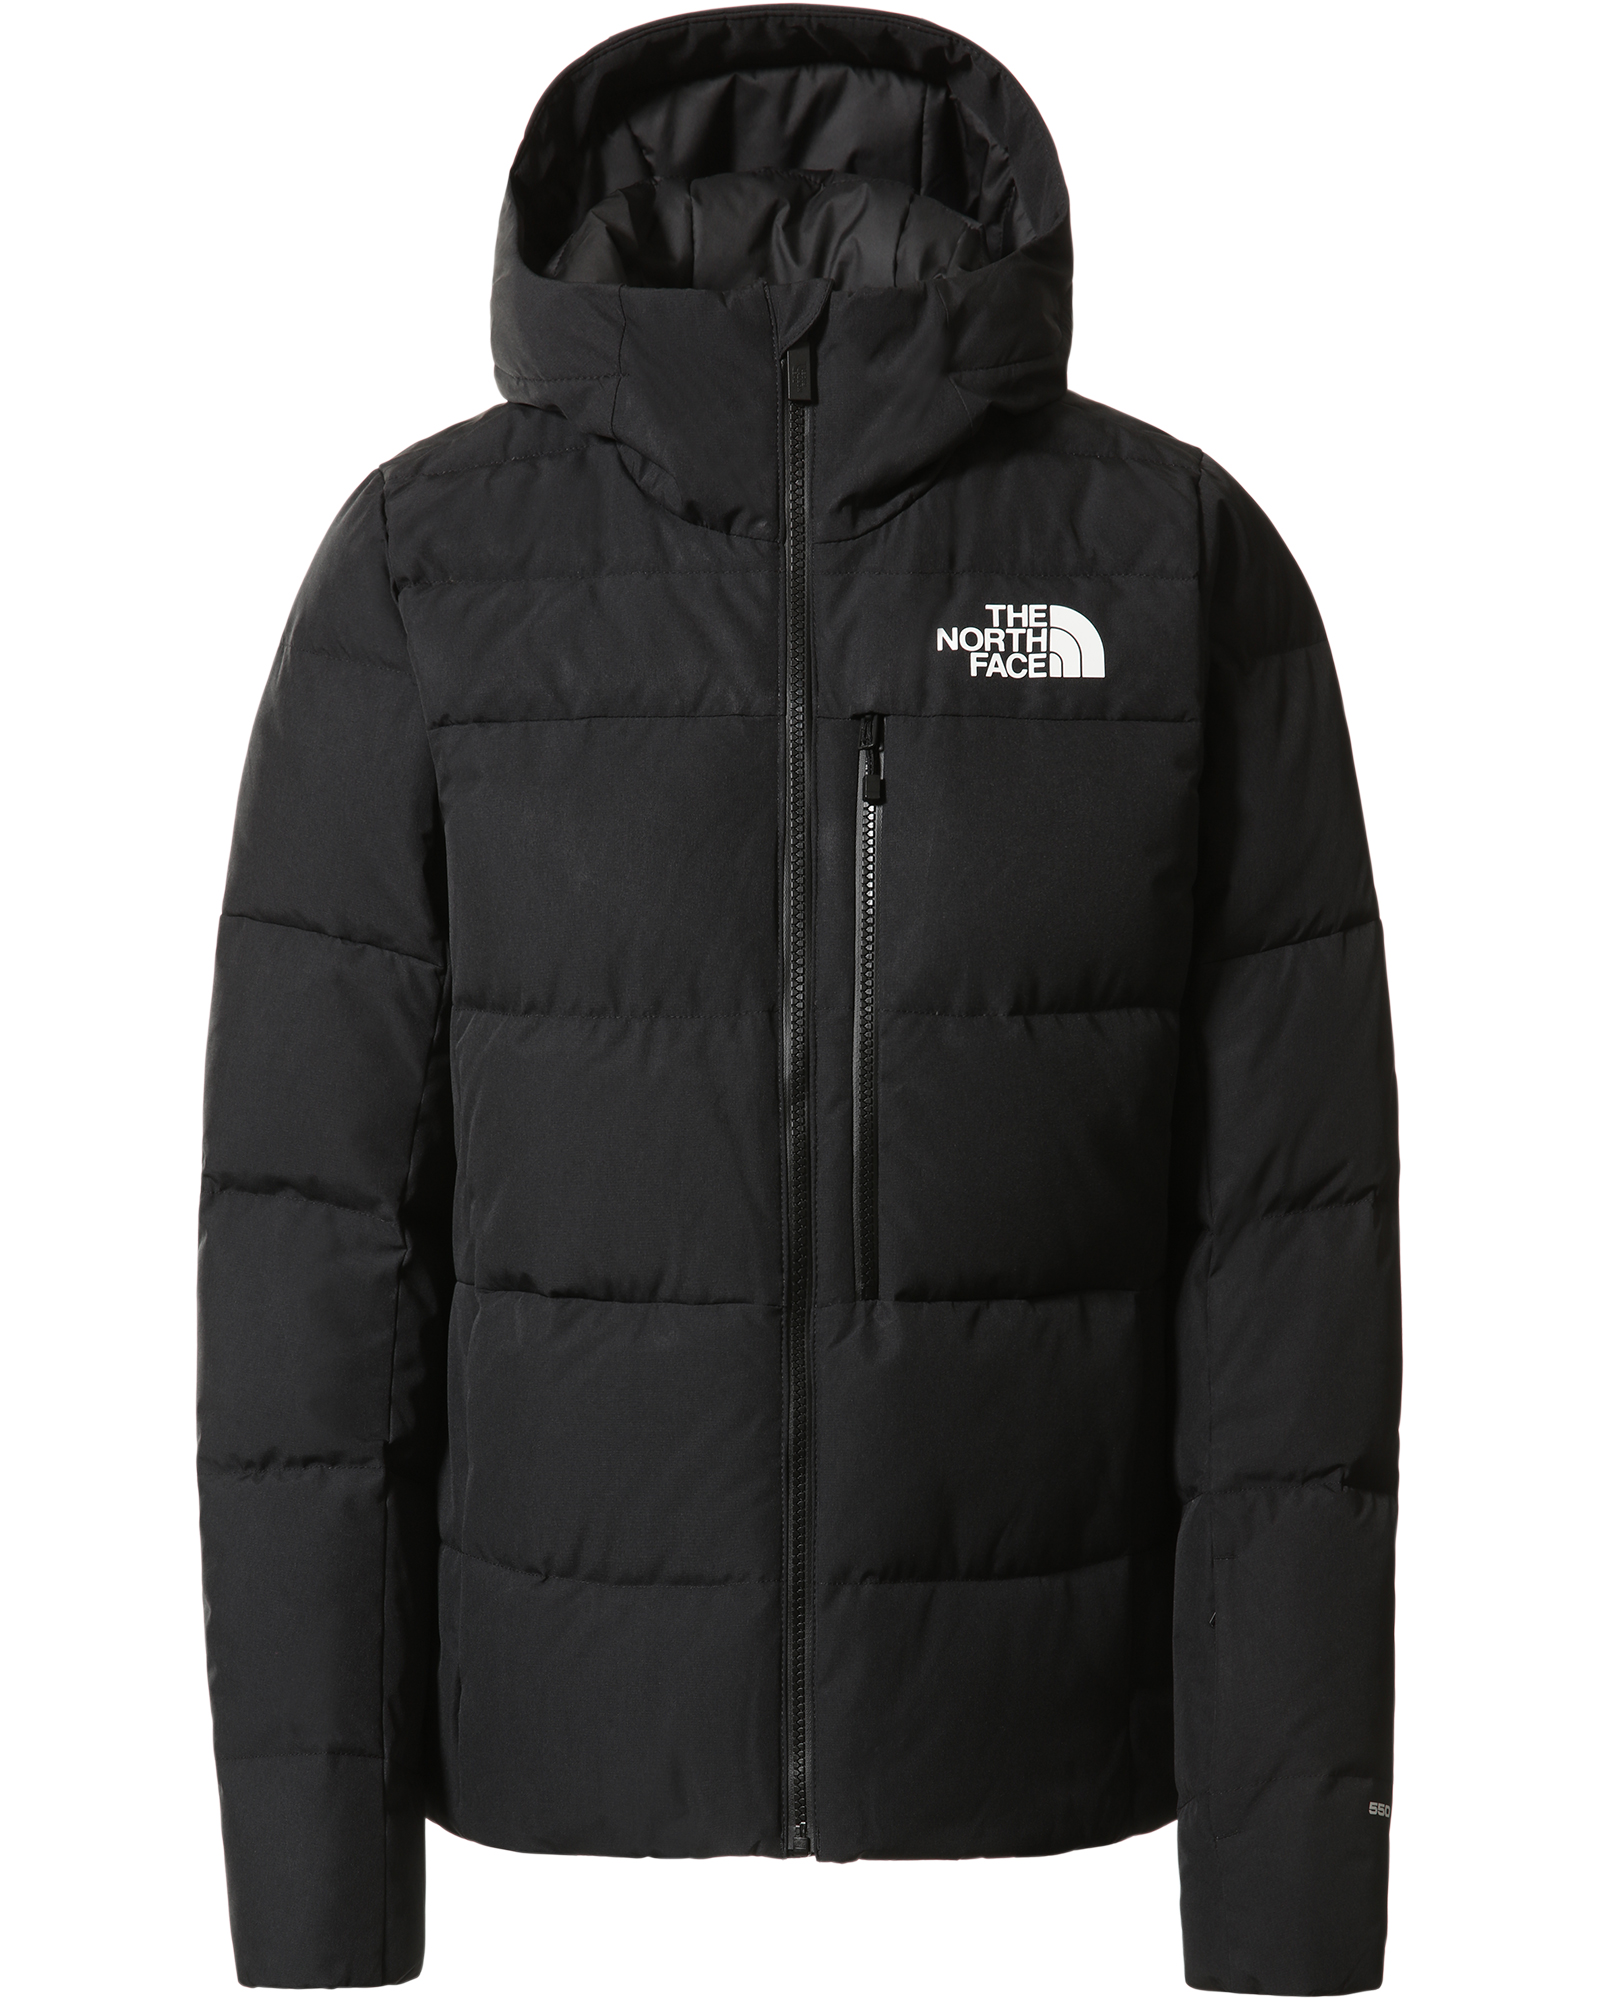 The North Face Heavenly Down Women’s Jacket - TNF Black S